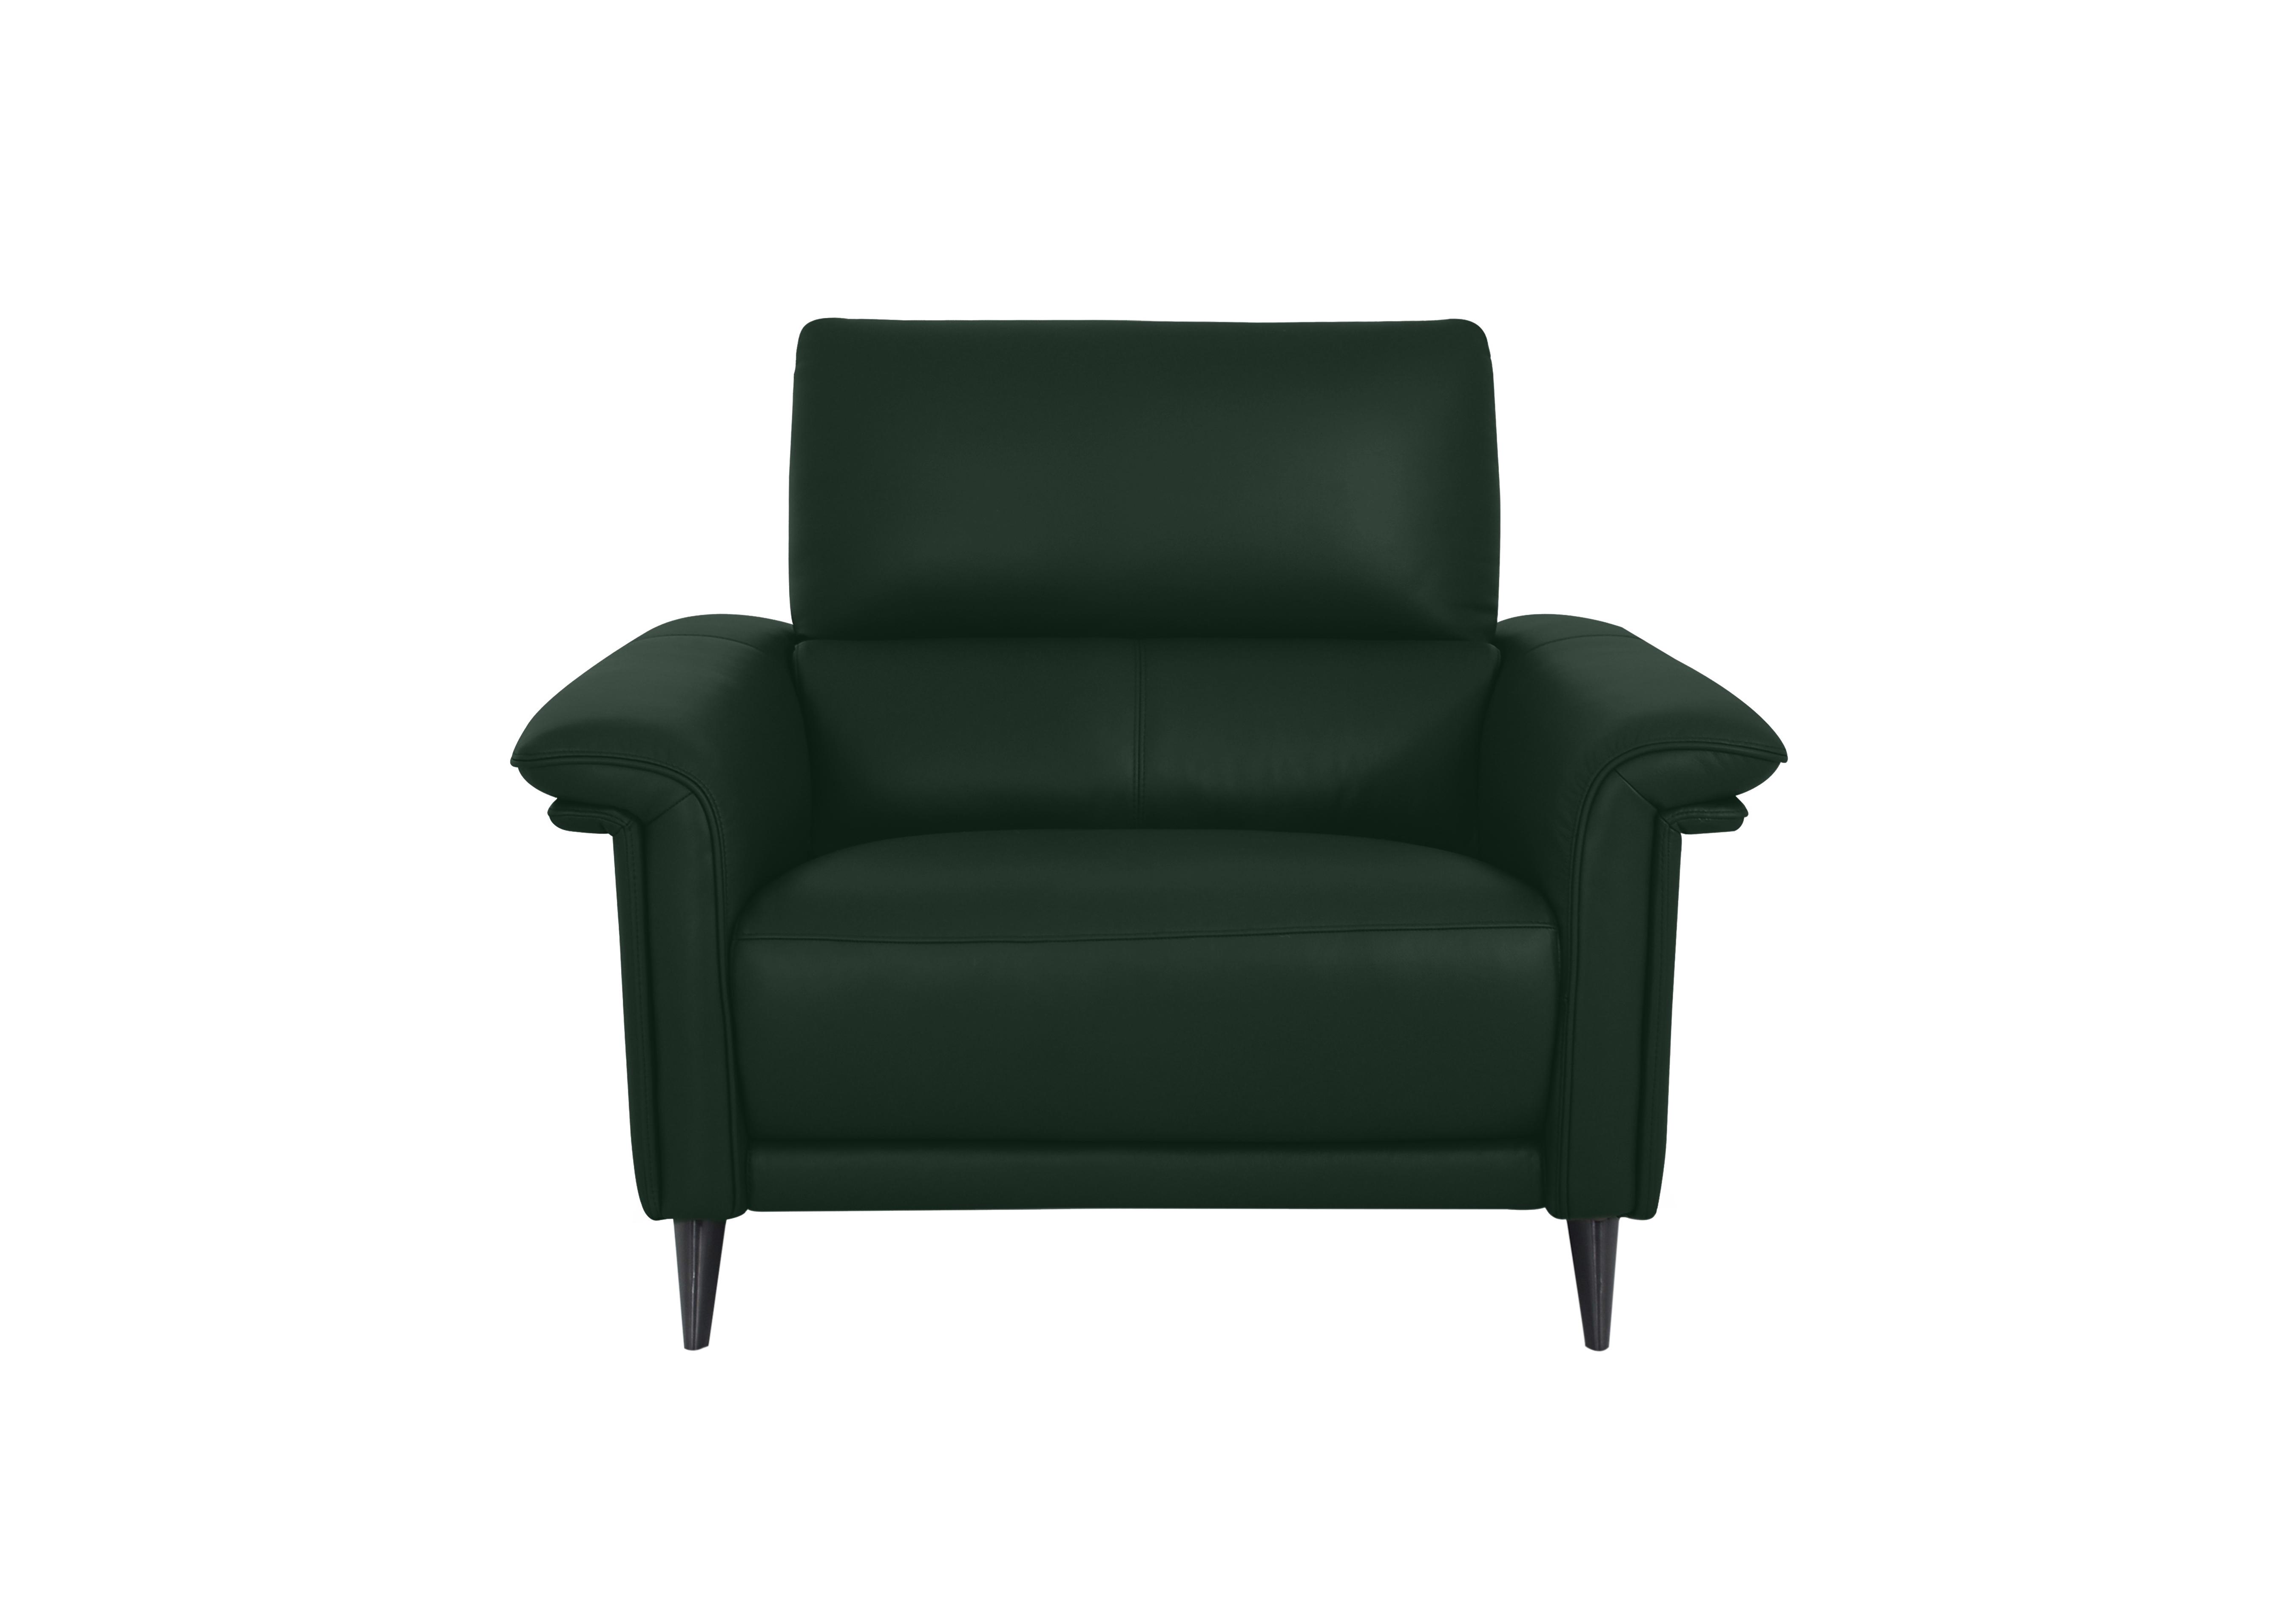 Huxley Leather Chair in Np-603e Dark Forest on Furniture Village